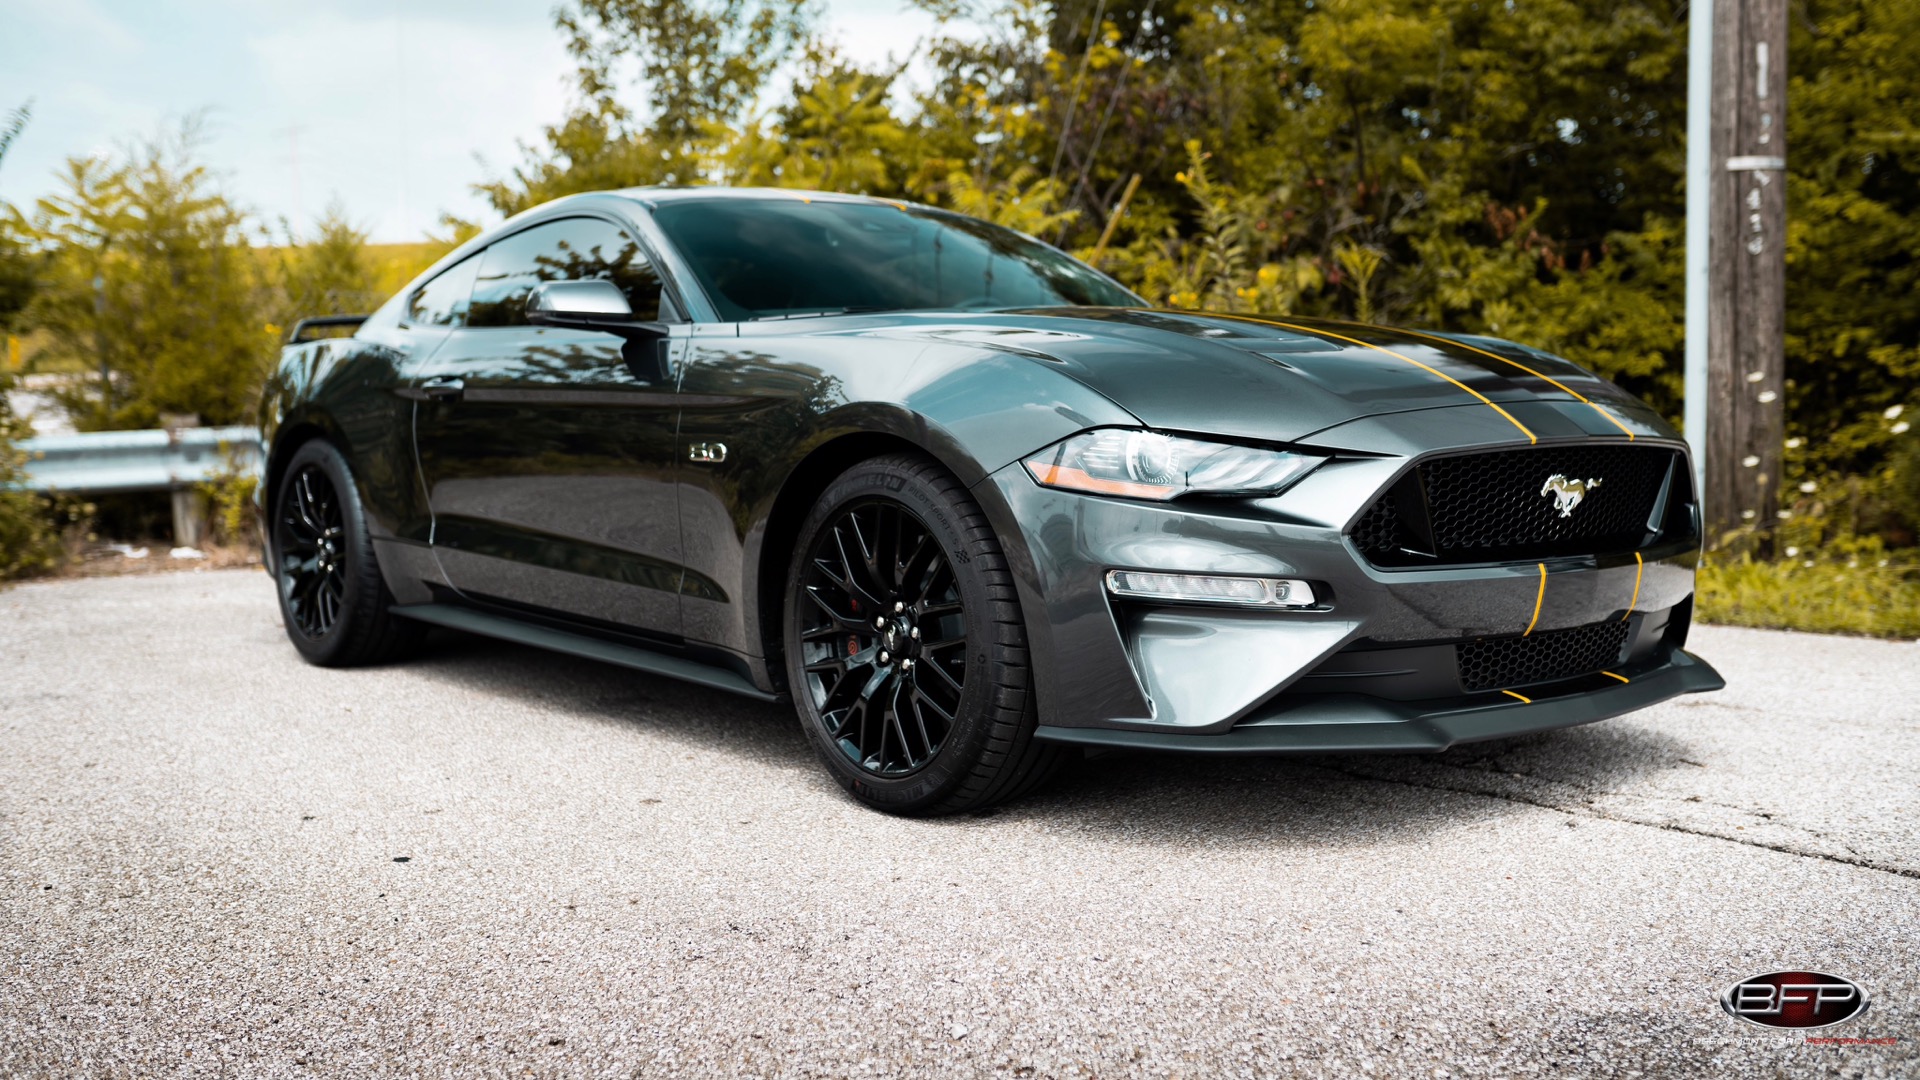 Beechmont Ford Performance Roush-Charged Mustang